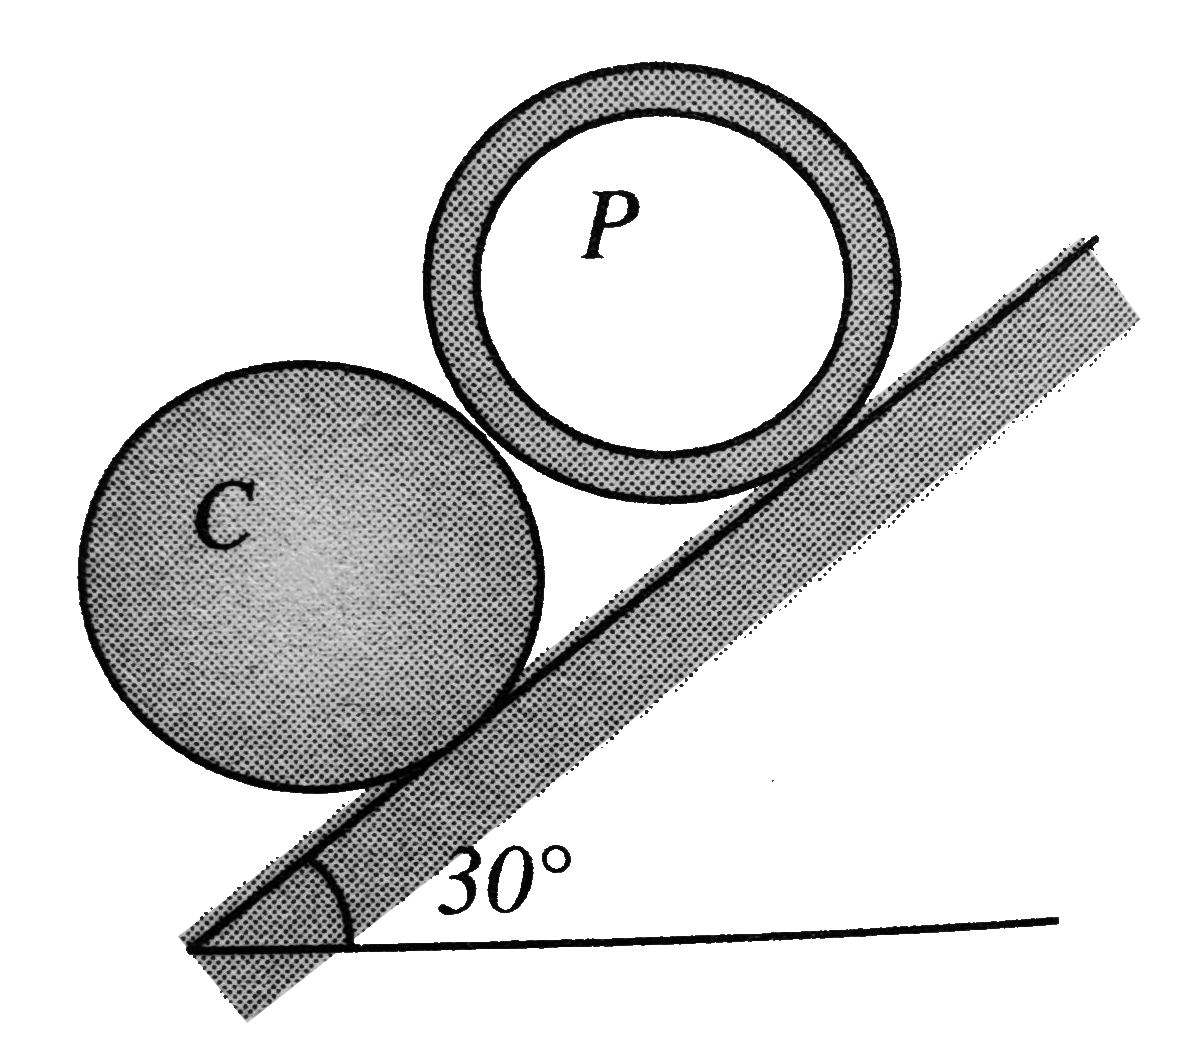 A solid cylinder C and a hollow pipe P of same diameter are in contact when they are released from rest as shown in the figure on a long incline plane. Cylinder C and pipe P roll without slipping Determine the clear gap (in m) between them after 2sqrt(3) seconds.